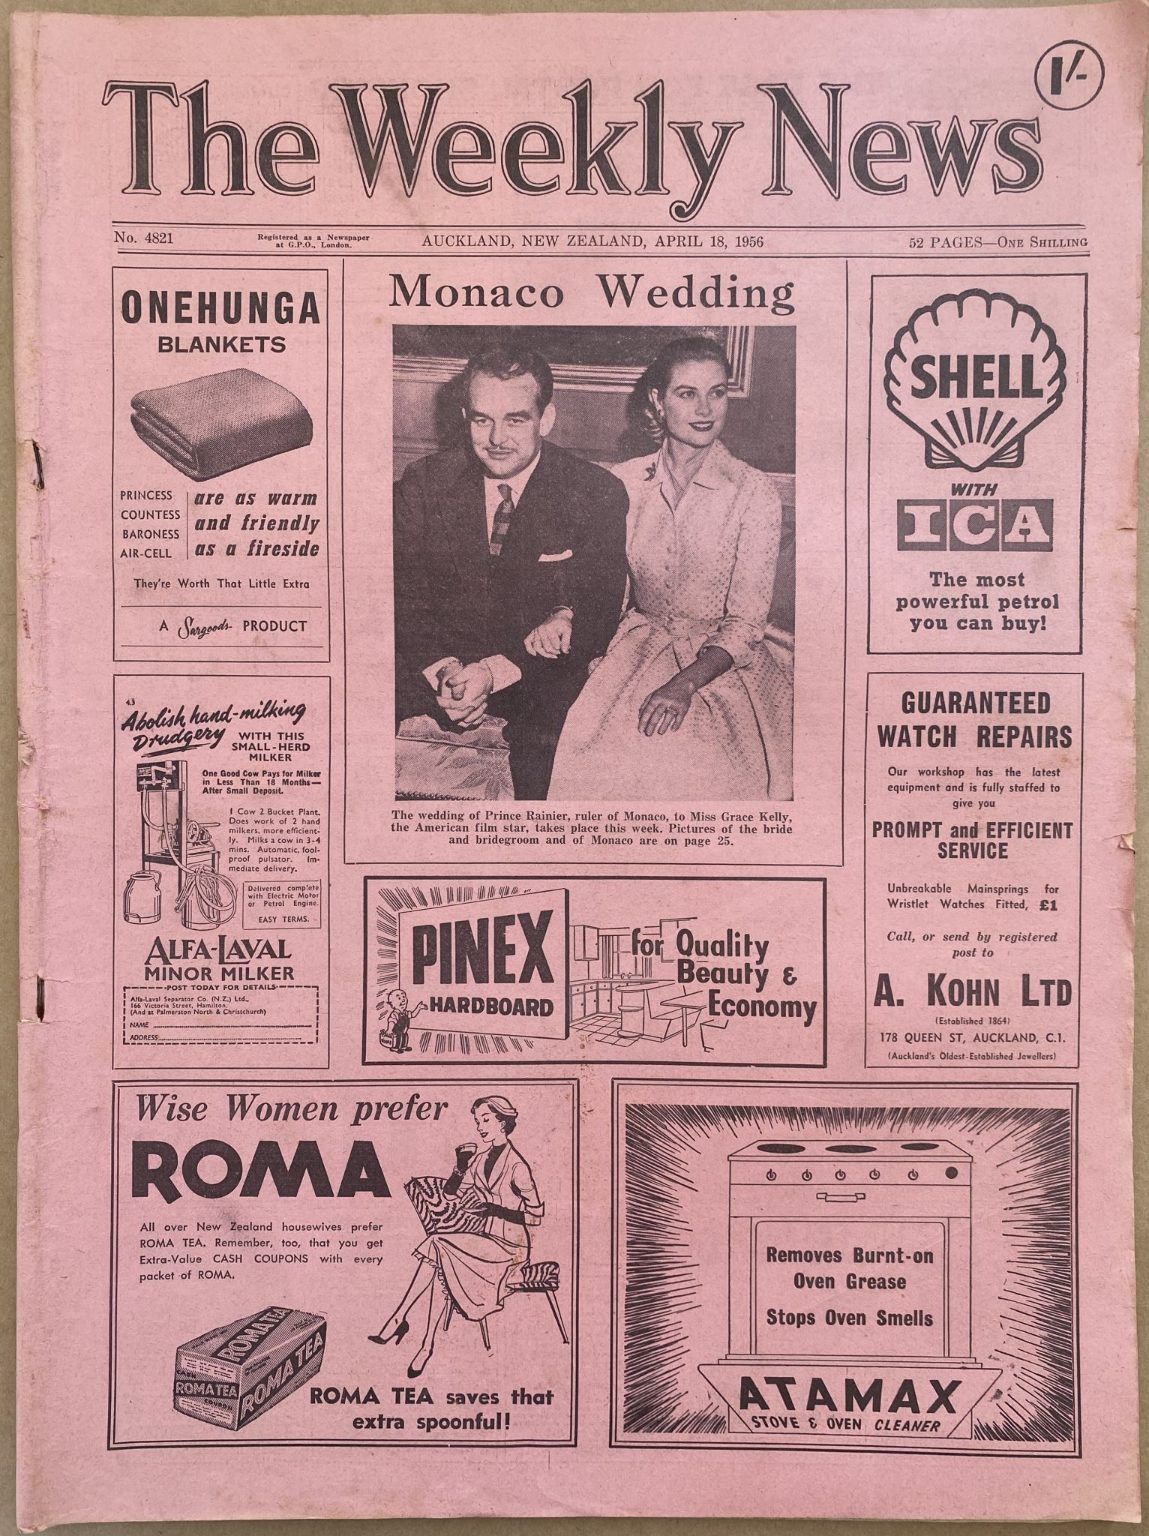 OLD NEWSPAPER: The Weekly News - No. 4821, 18 April 1956